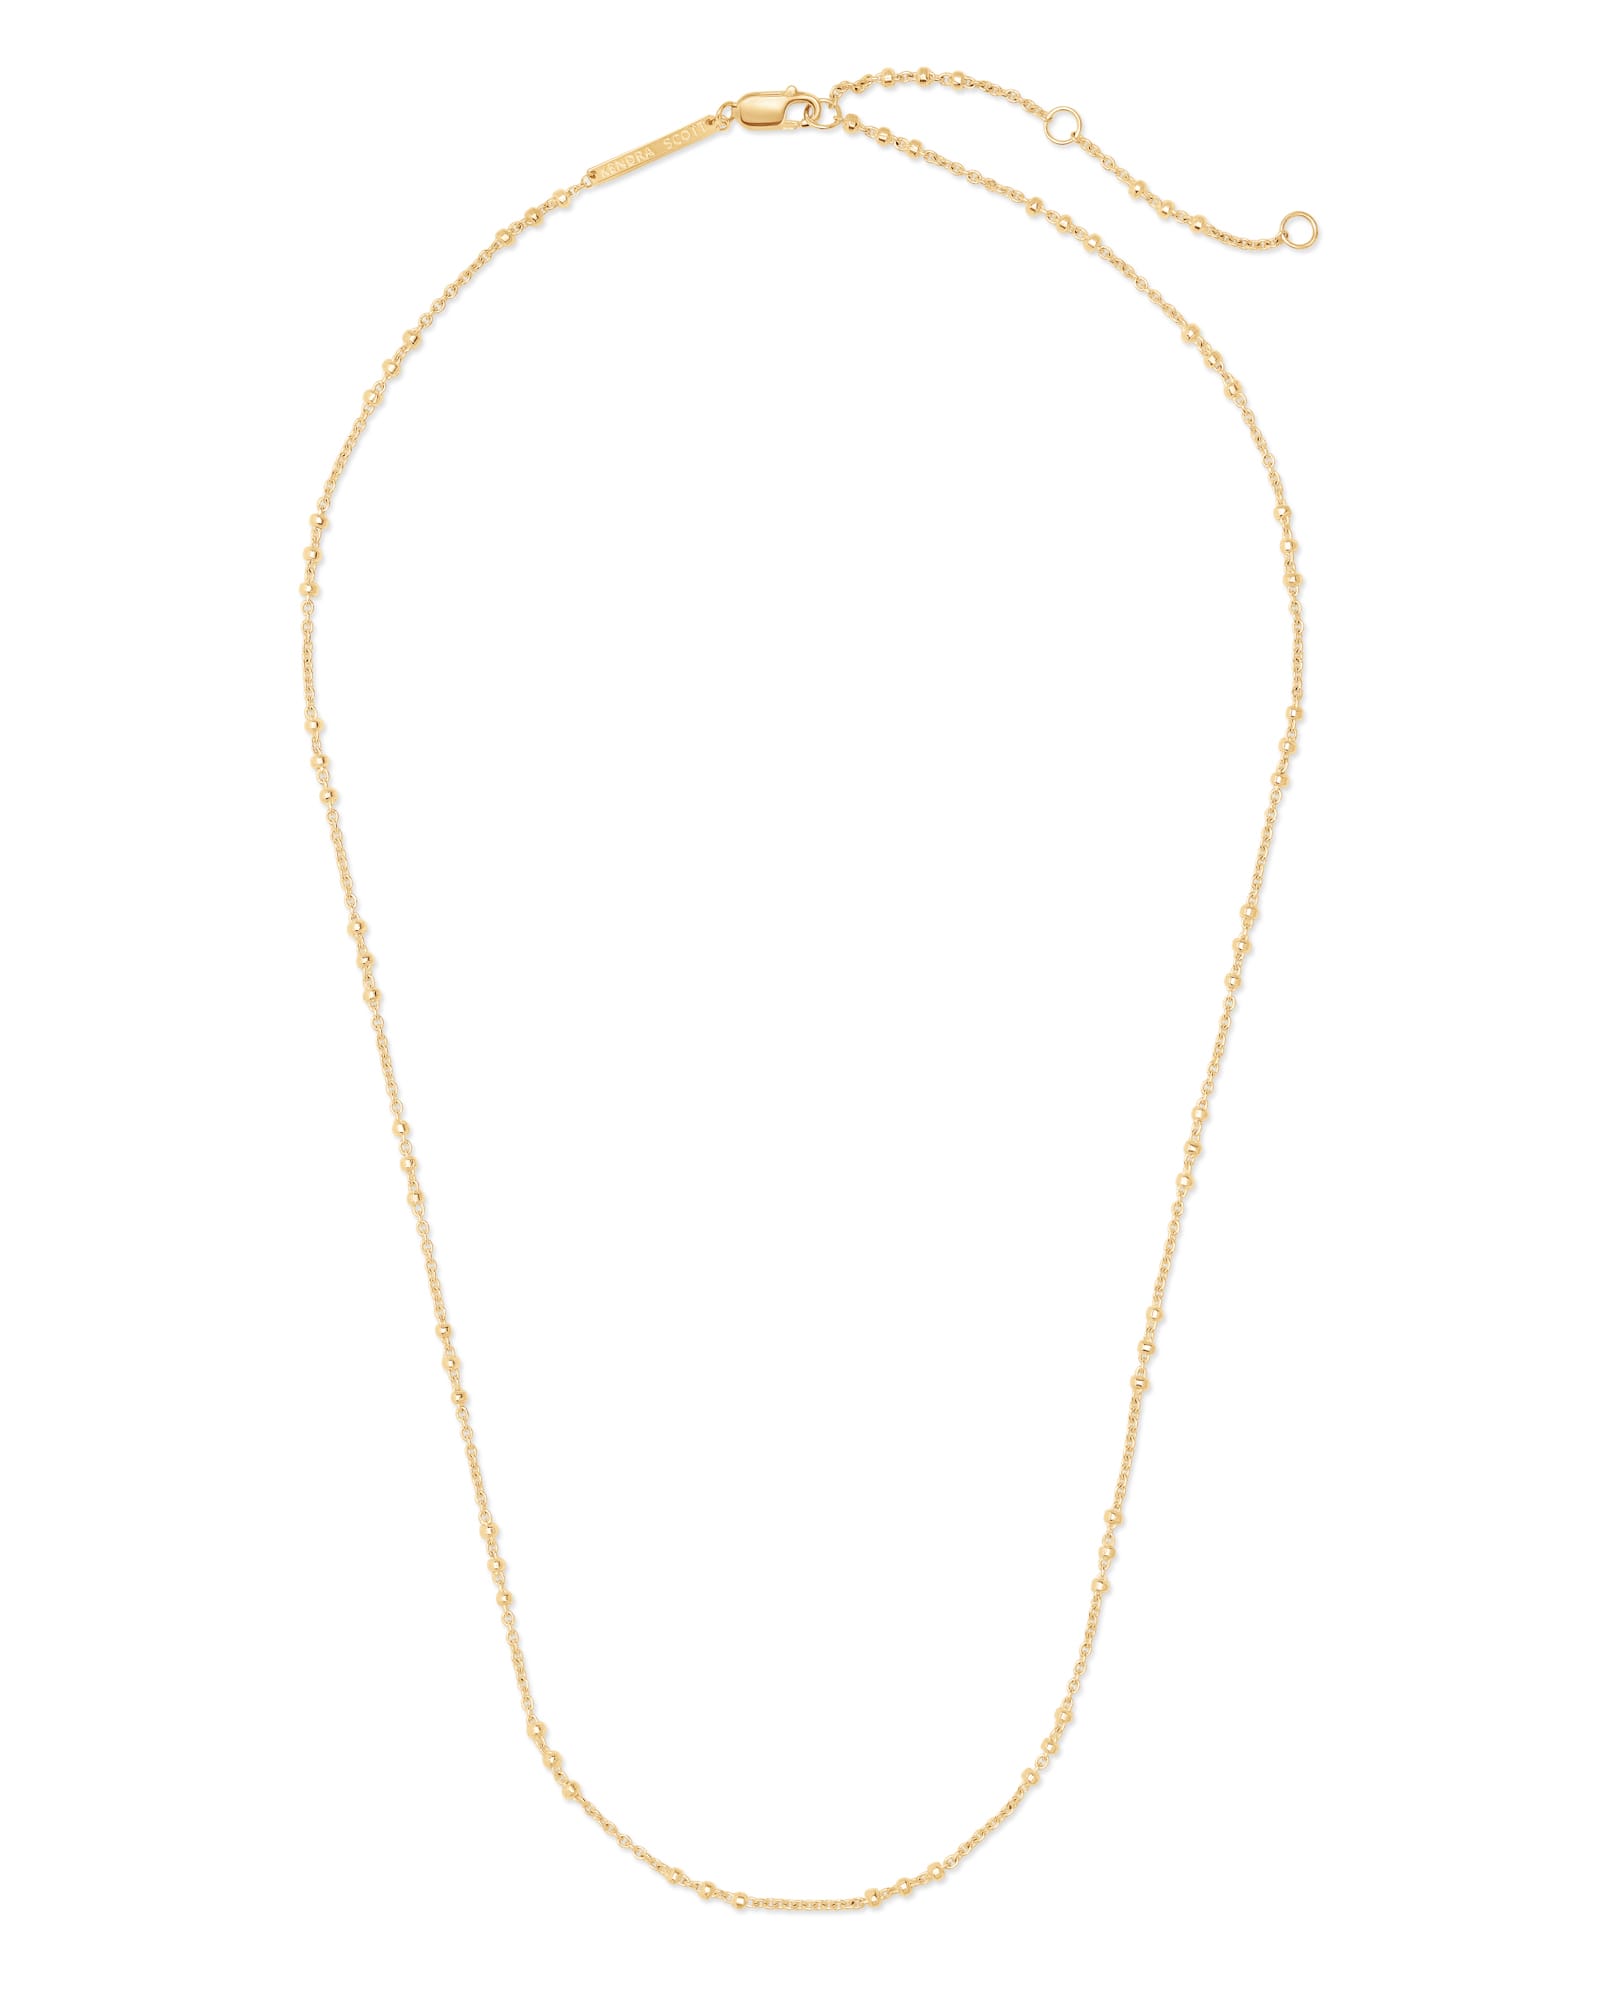 Single Satellite Chain Necklace in 18k Yellow Gold Vermeil